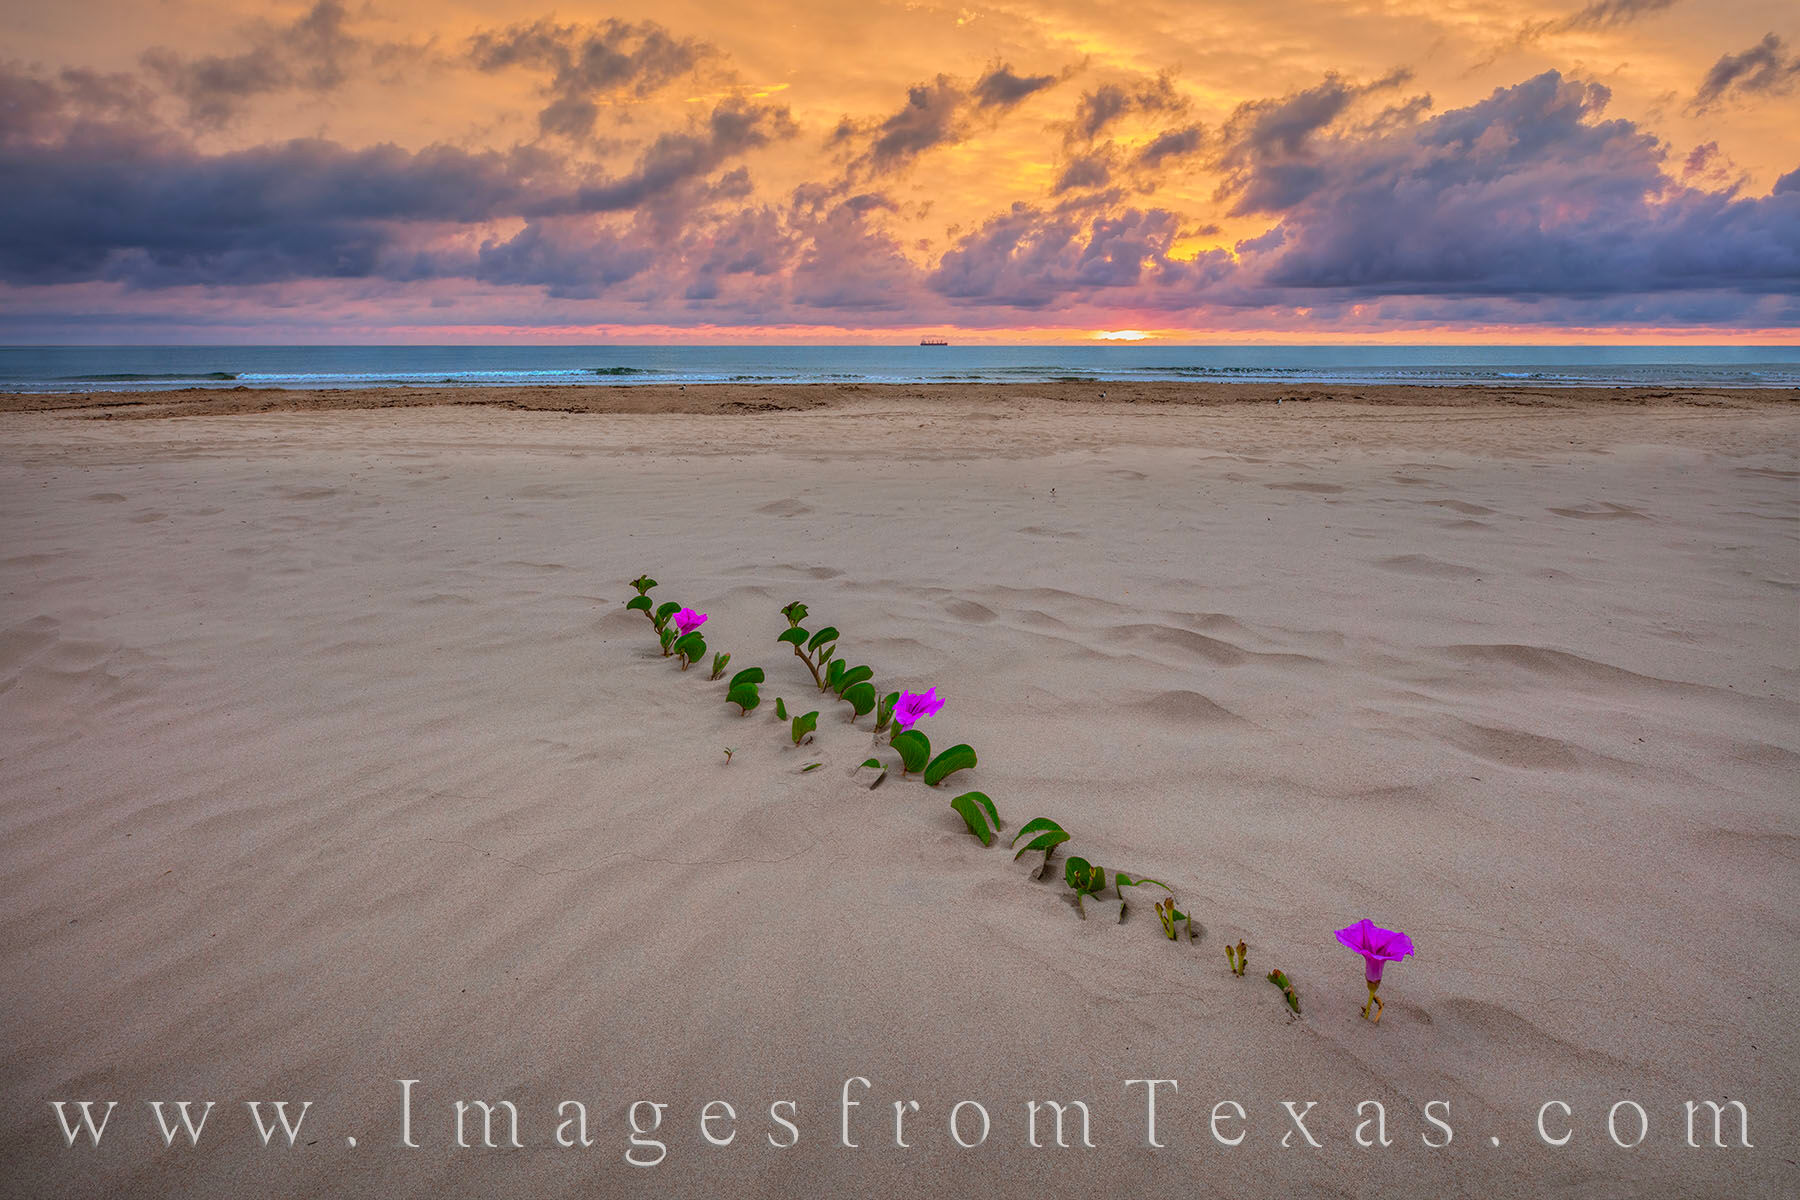 A morning glory vine reaches toward the ocean in this beach photograph fro South Padre Island. Taken on a warm and humid June...